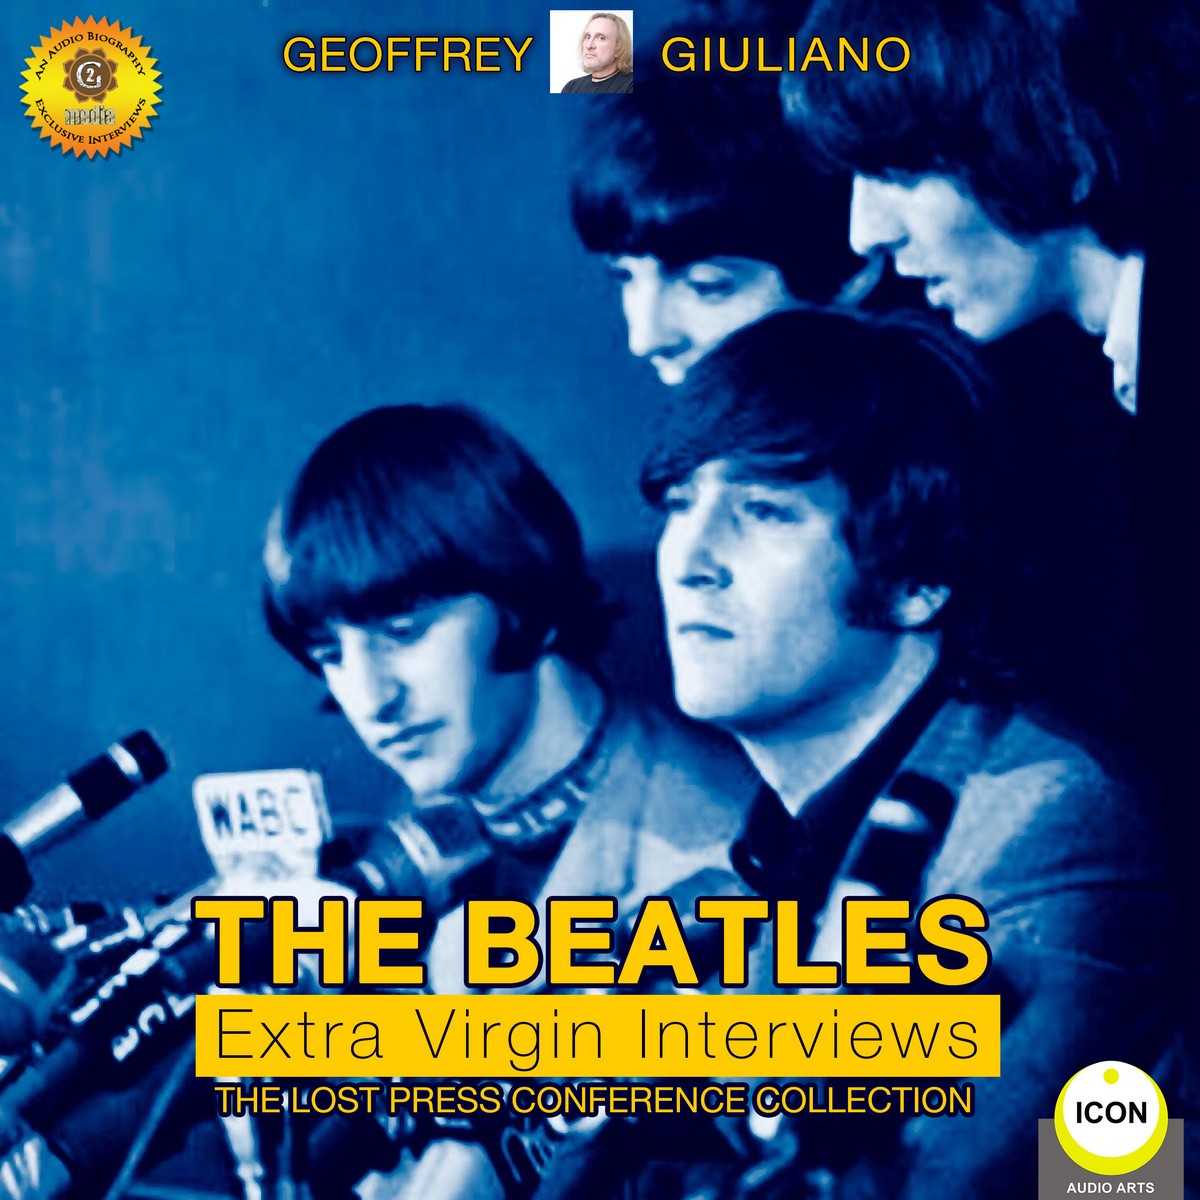 The Beatles Extra Virgin Interviews – The Lost Press Conference Collection